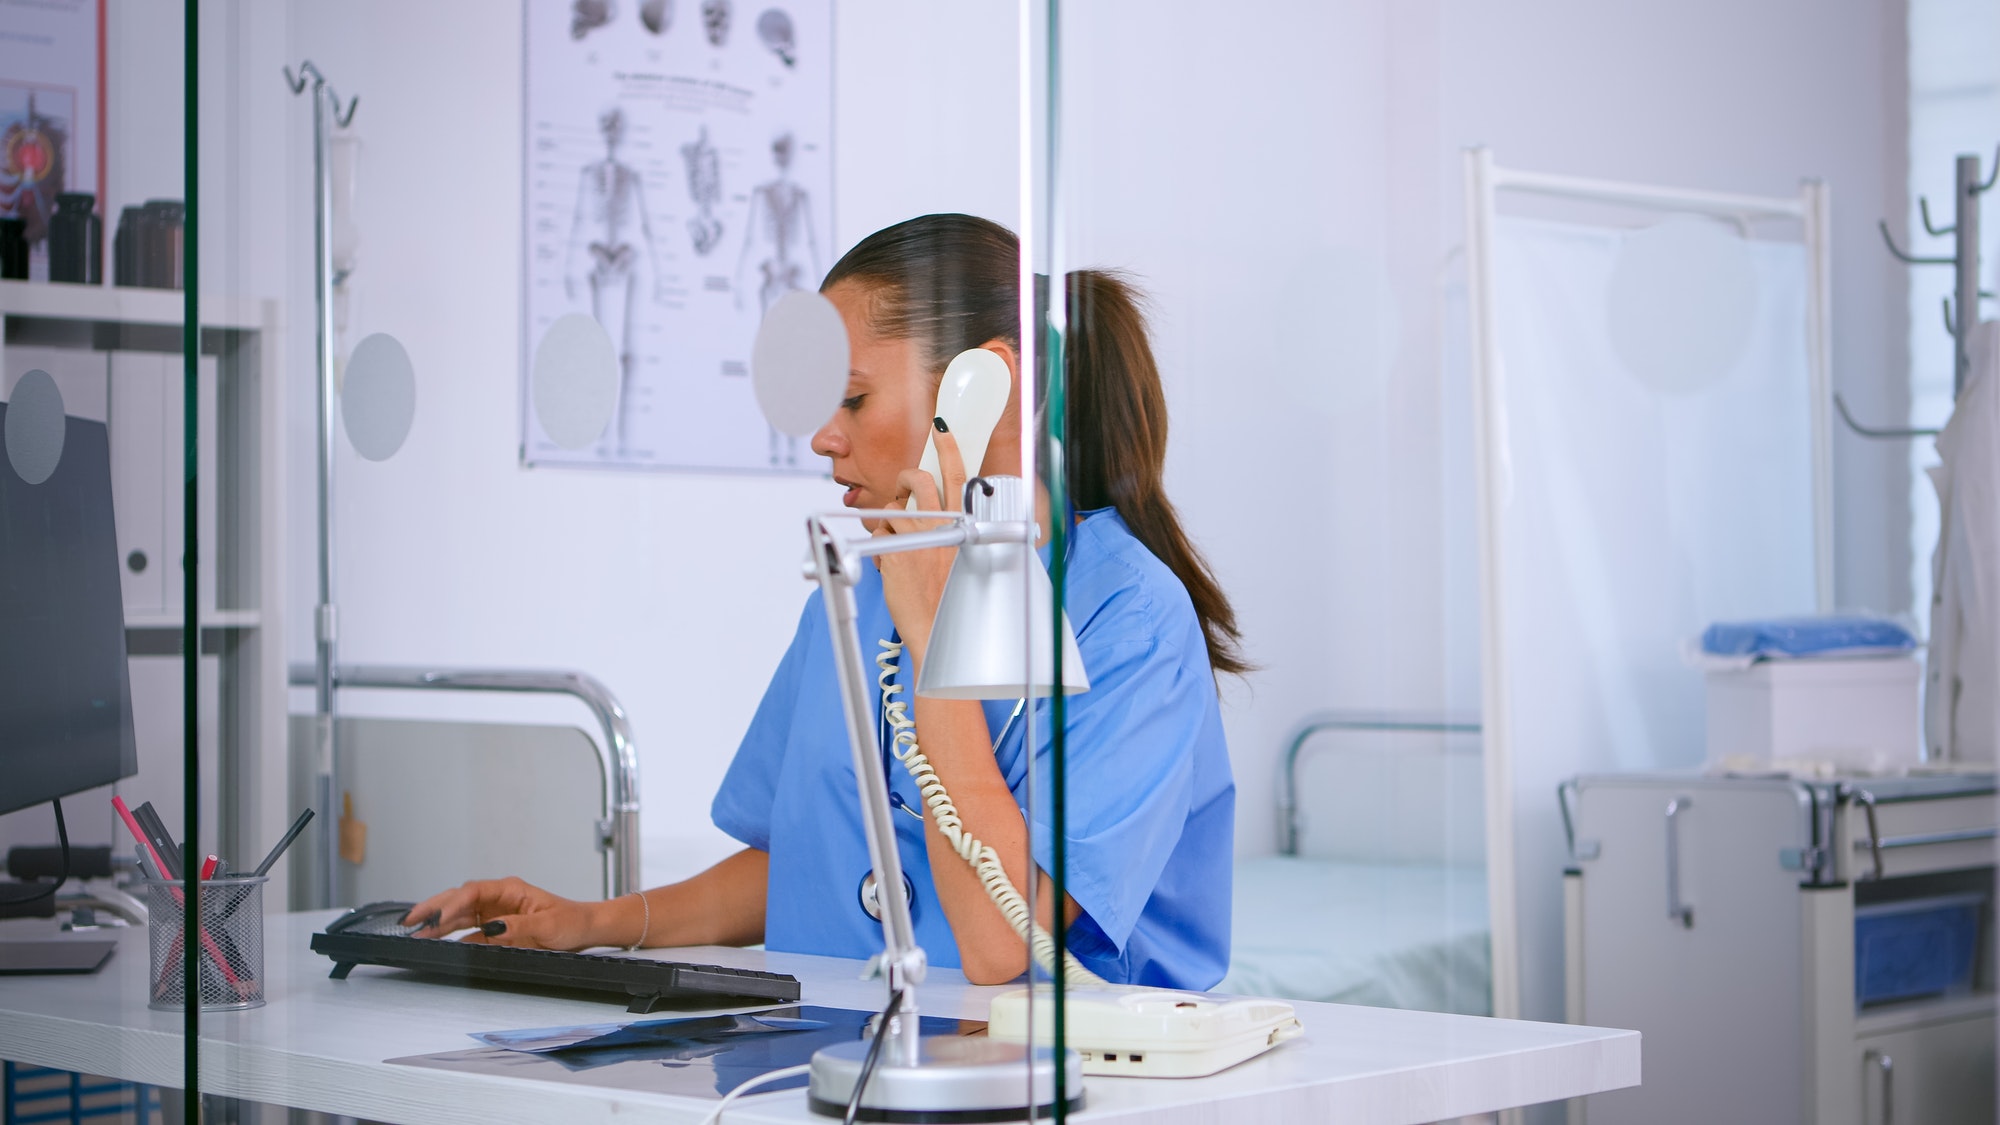 Healthcare physician answering phone calls